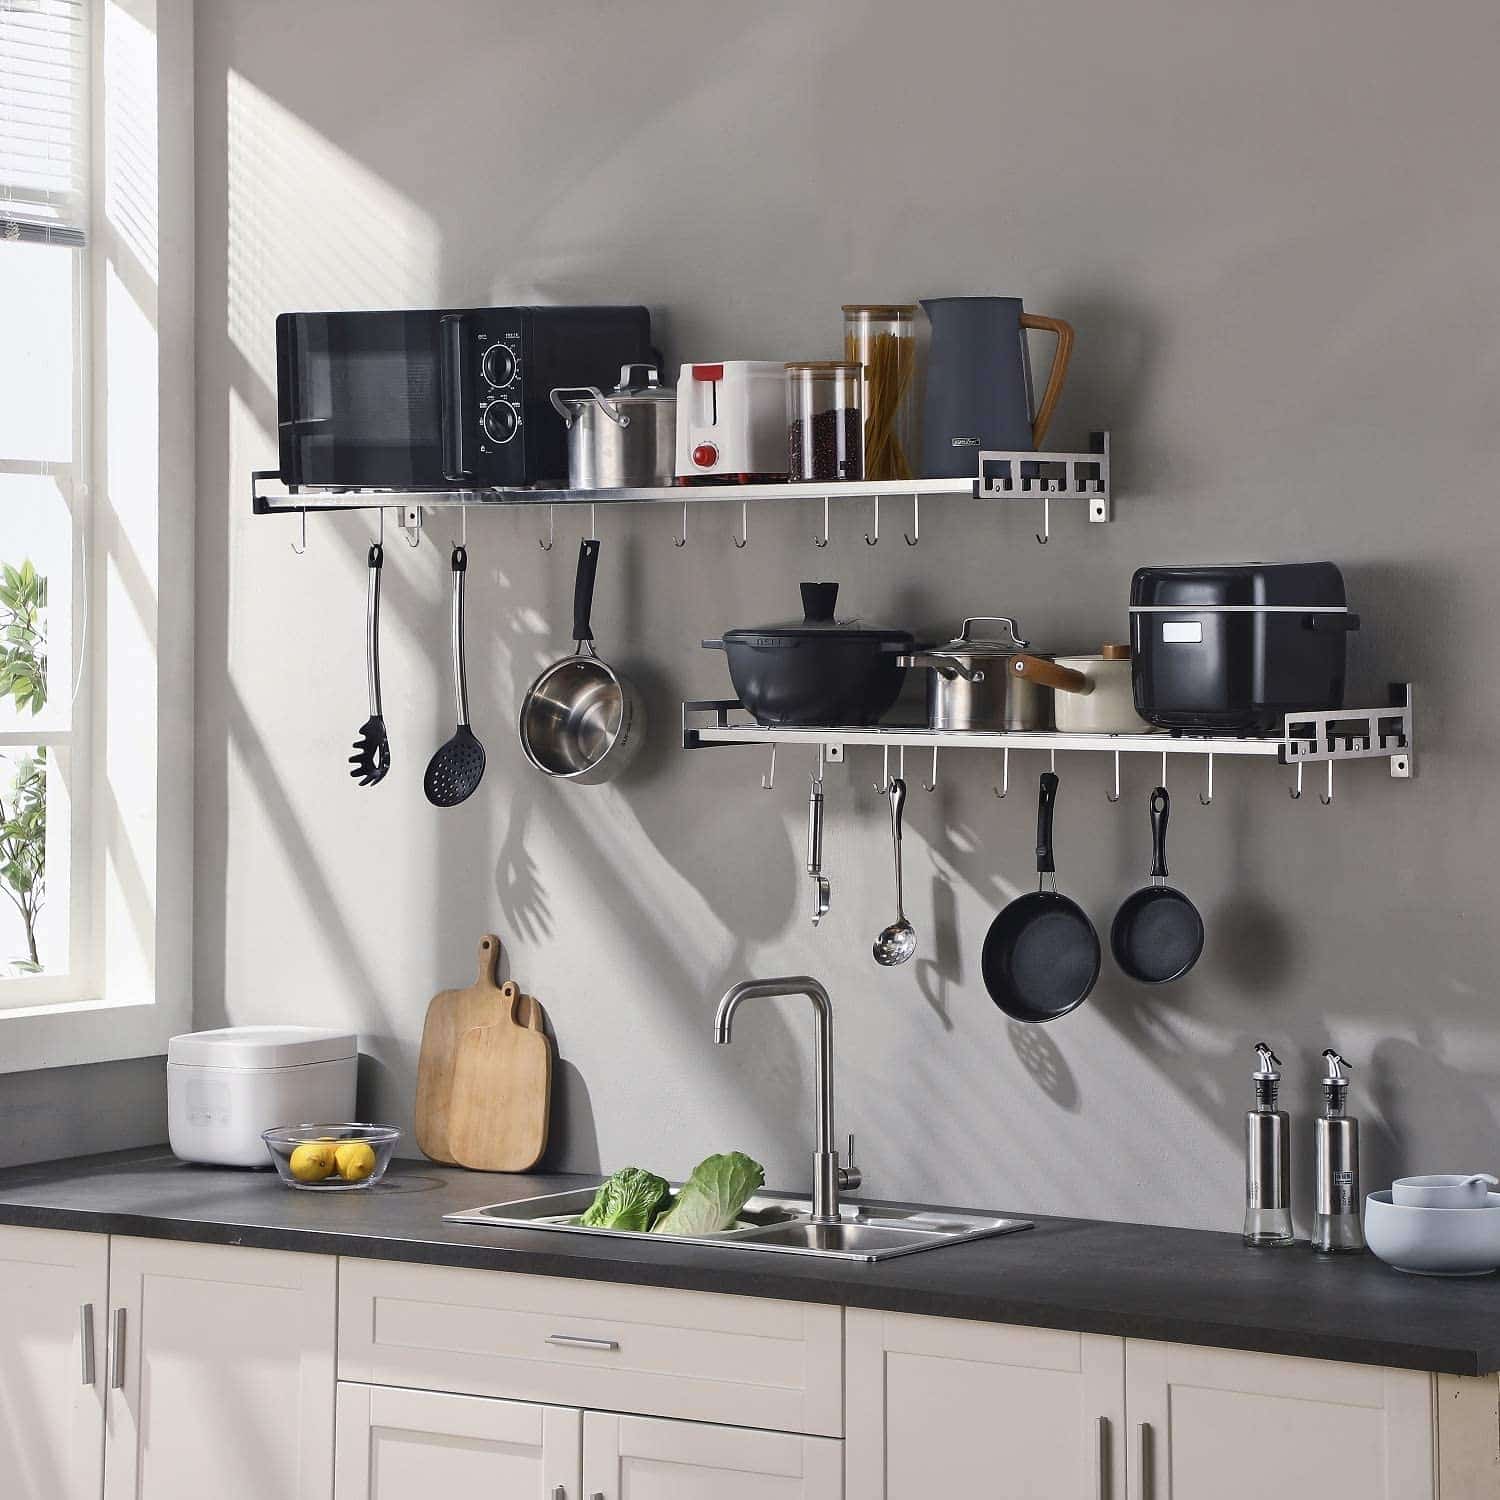 istBoom Wall Mounted Pots and Pans Rack with 16 Hooks, Stainless Steel Wall Shelf for Kitchen Bathroom Bedroom Pantry